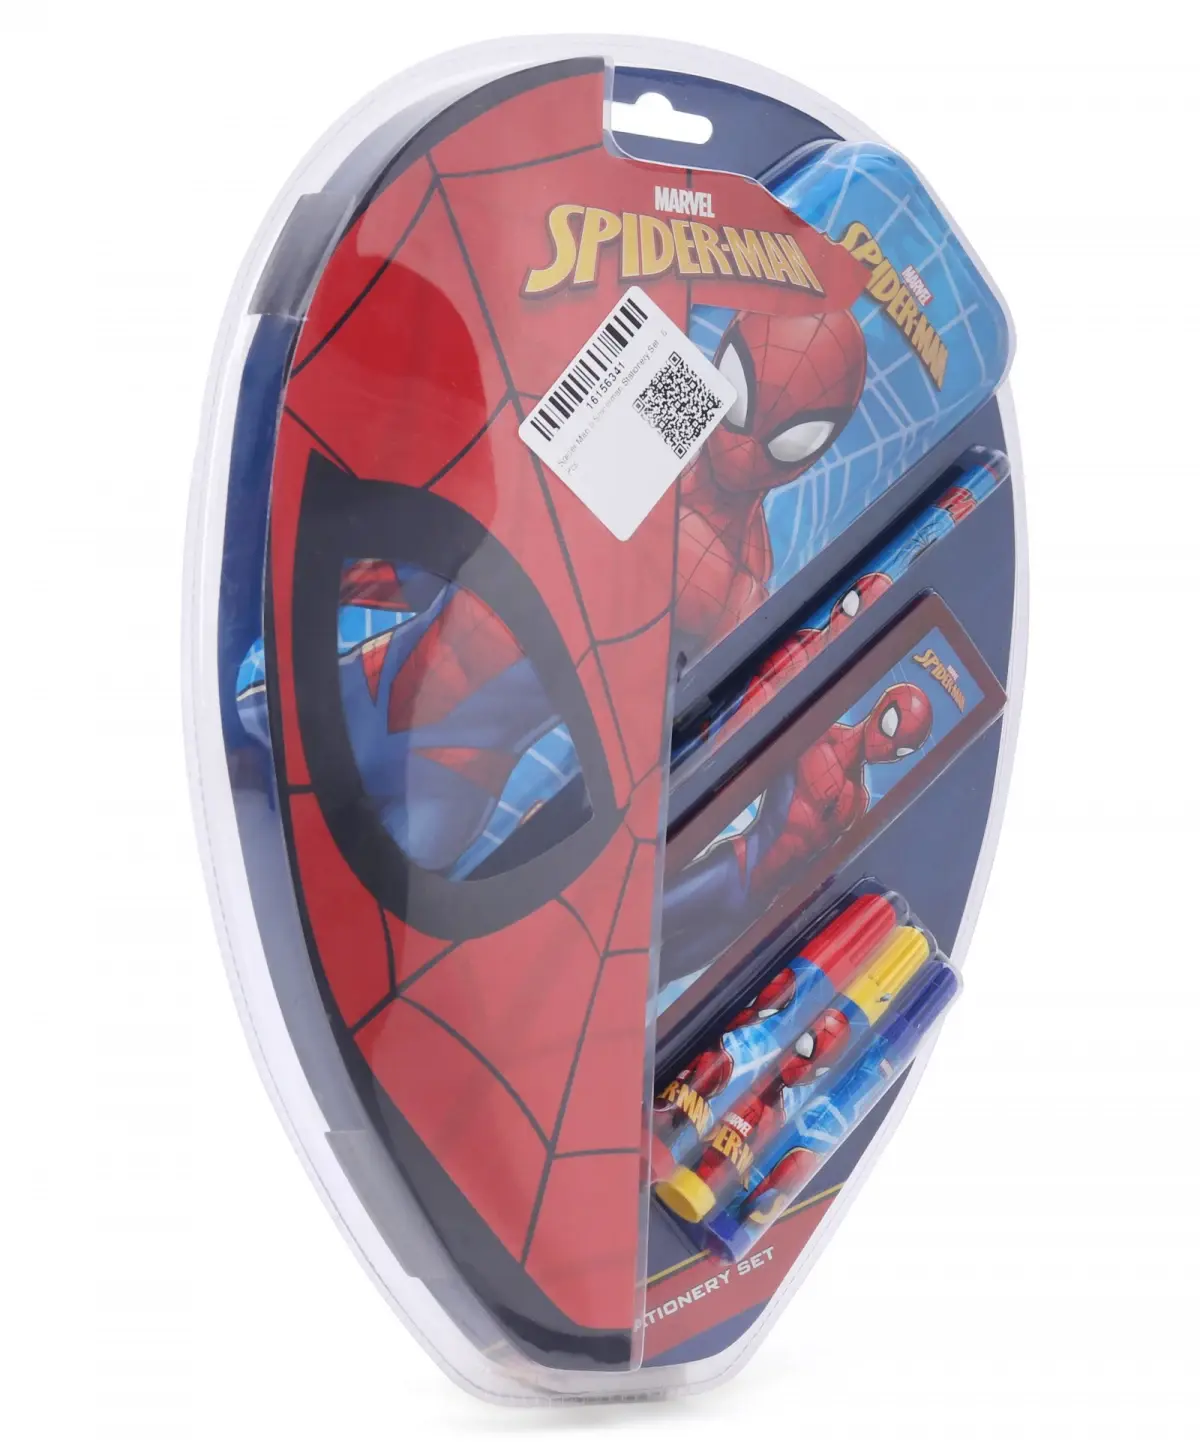 Striders Spiderman Stationery Set (6Pcs) With Spiderman Theme, 3Y+, Multicolour